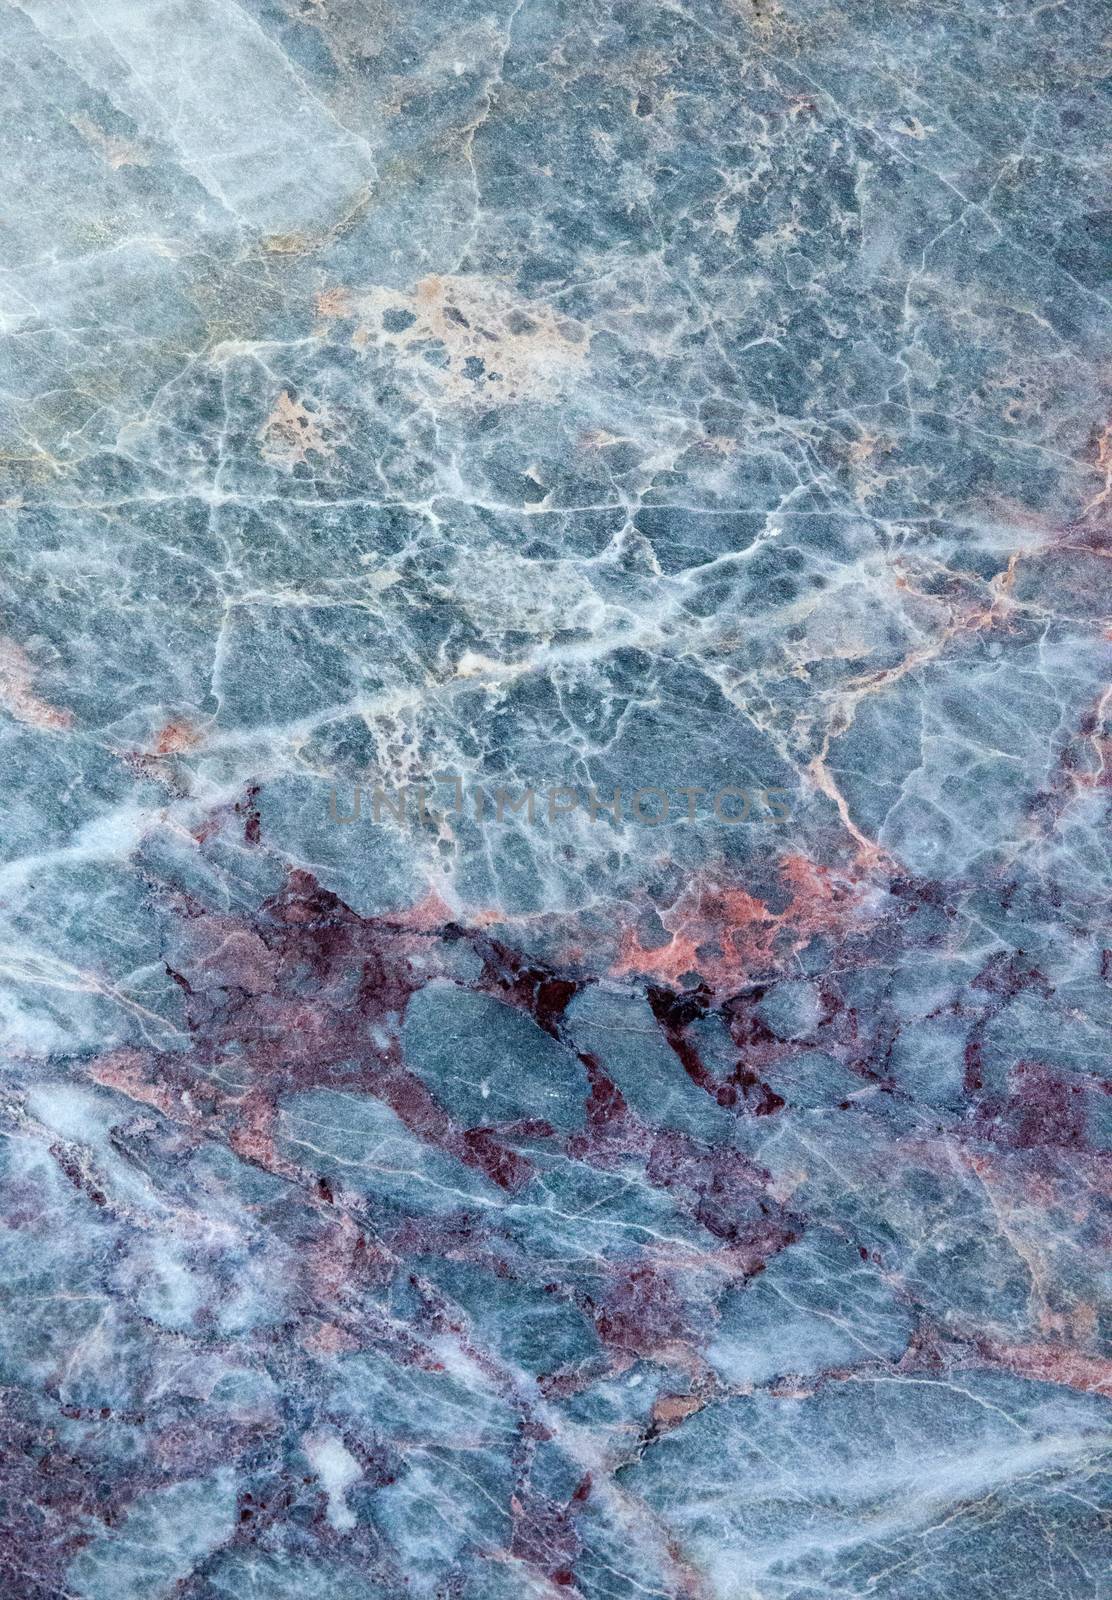 marble stone surface for decorative works or texture